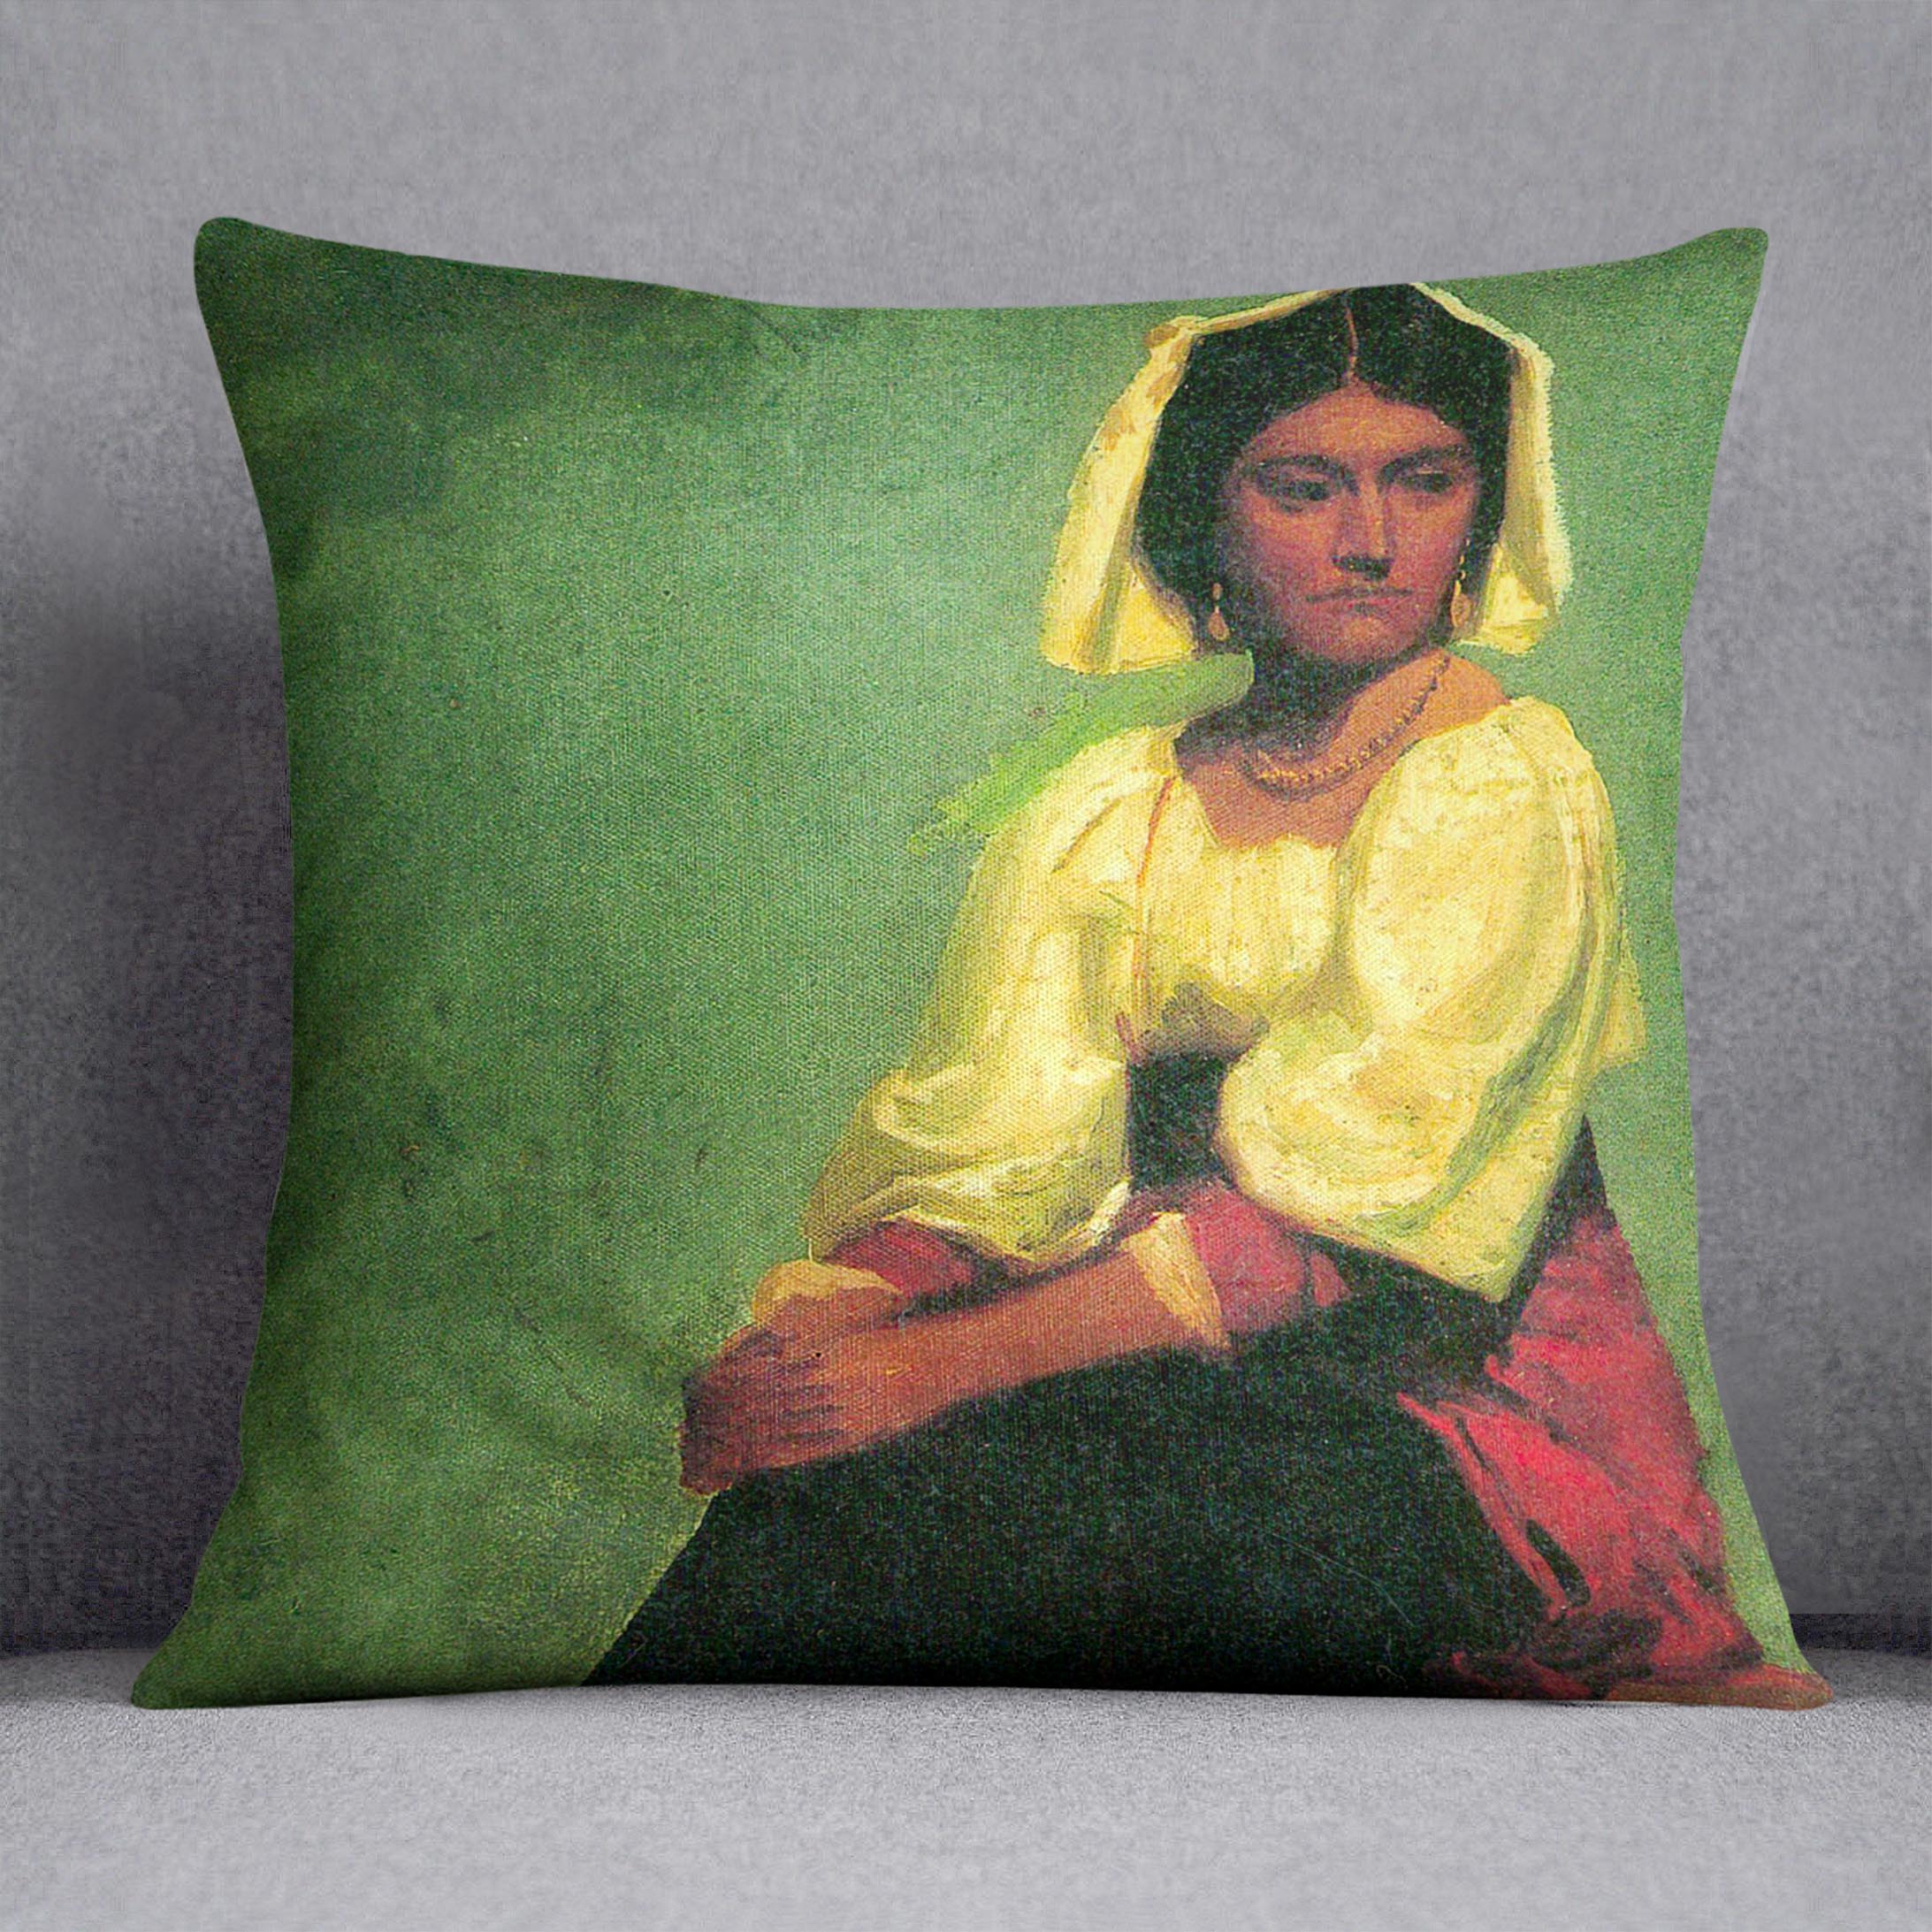 Costume study of a seated woman by Bierstadt Cushion - Canvas Art Rocks - 1